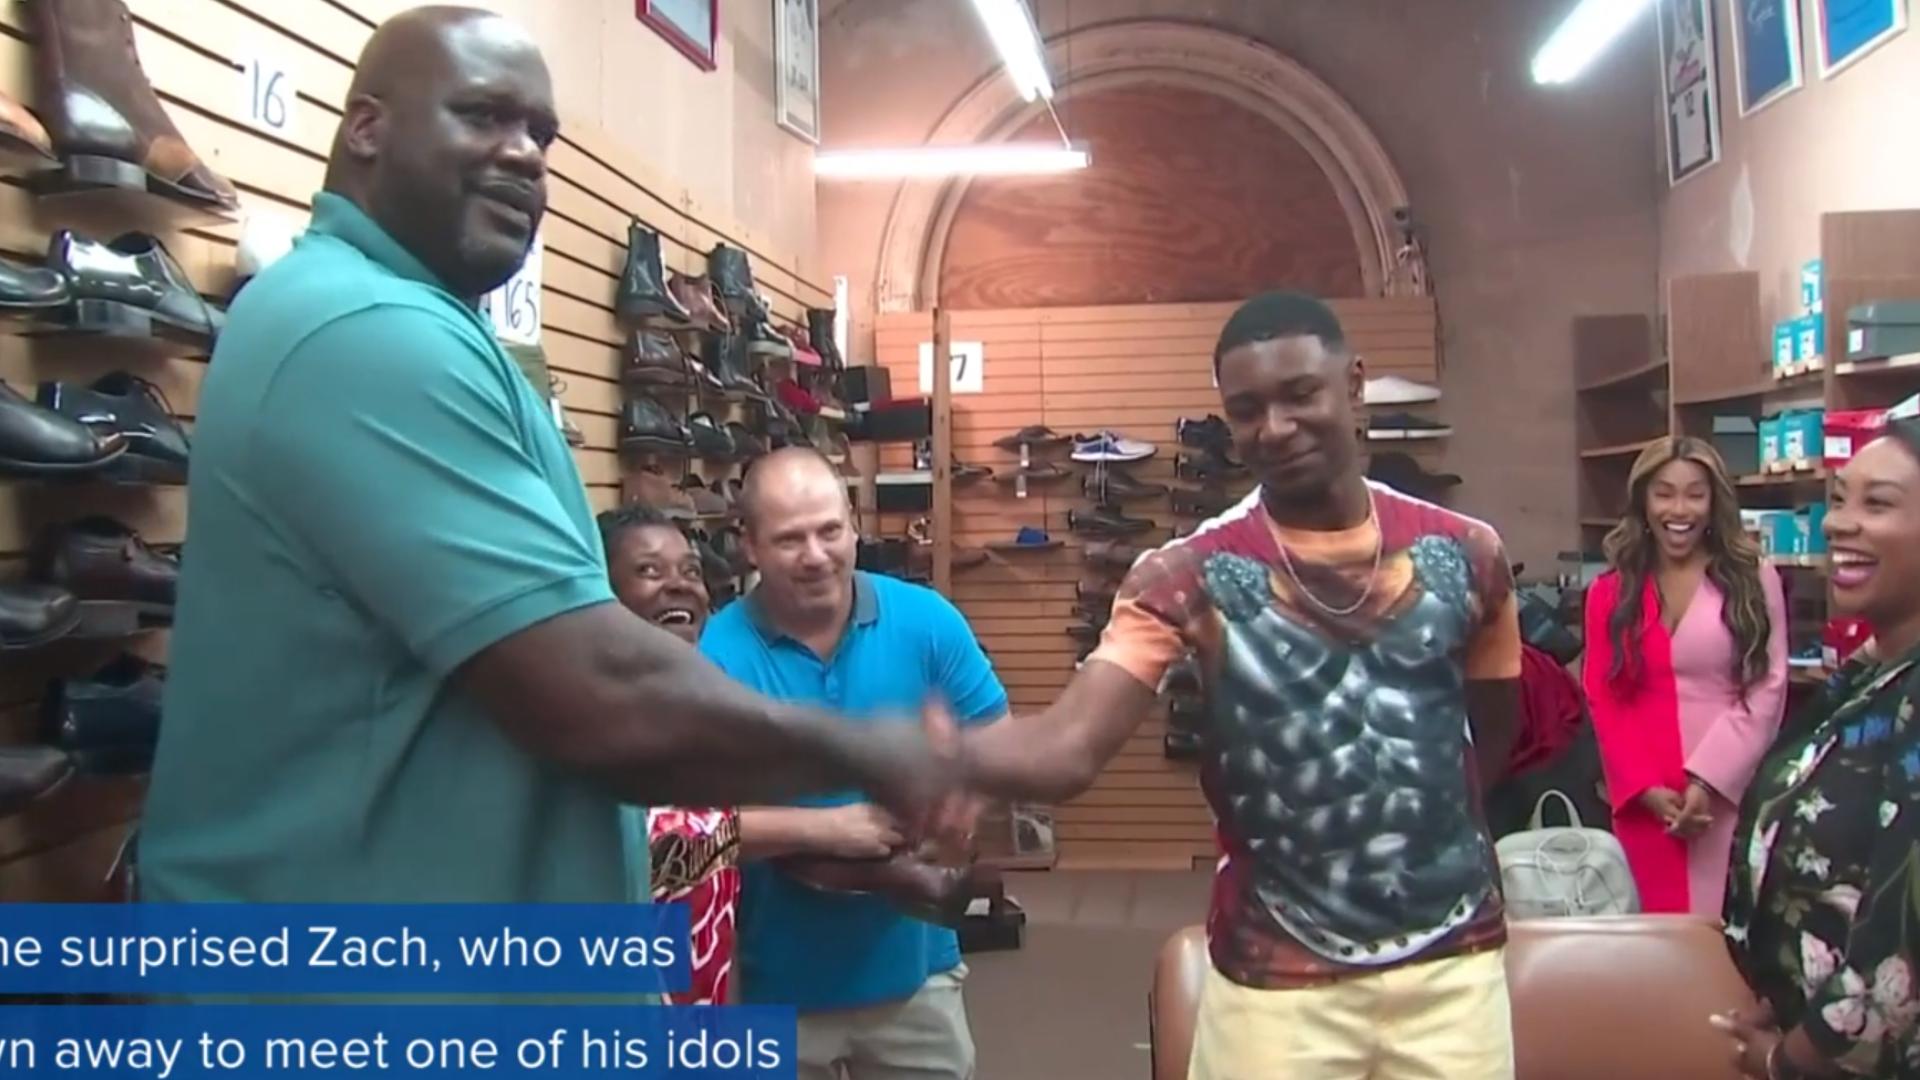 Zach Keith, a young basketball player from Georgia, is only 13 years old but he already wears a size 18 shoe. Unfortunately, Keith's mom can't afford his extra-large sneakers. But, luckily for the teen, former NBA star Shaquille O'Neal heard the teen's story and wanted to help.